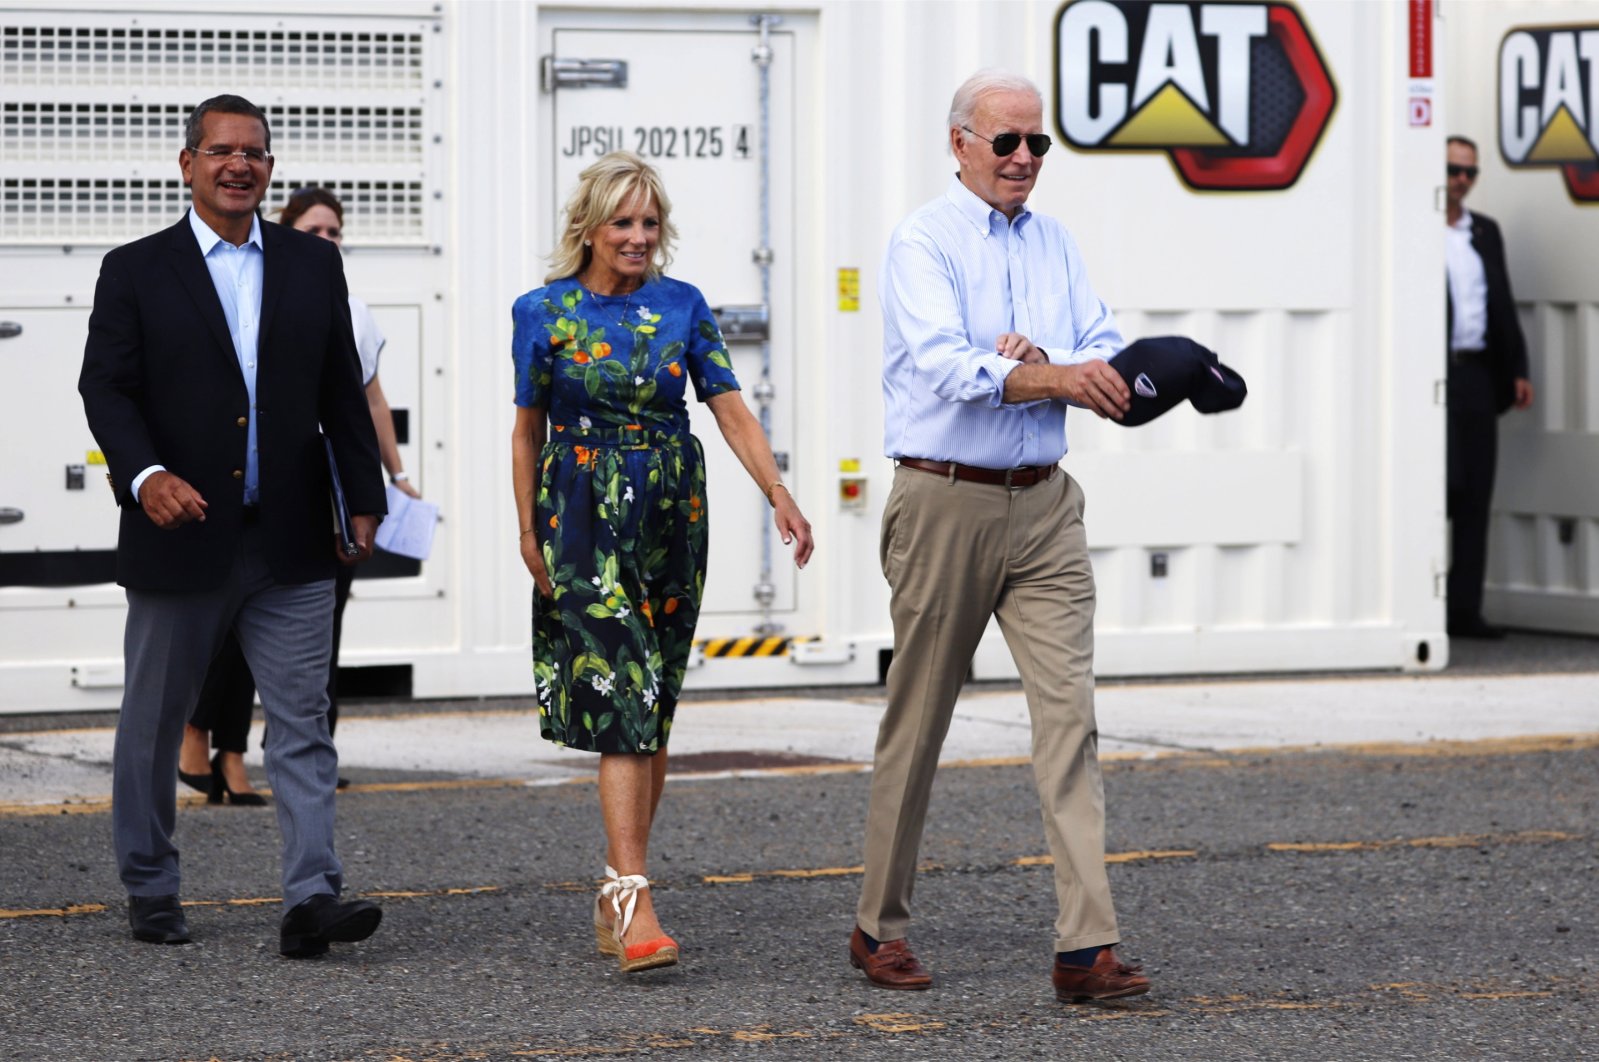 U.S. President Joe Biden (R) walks with first lady Jill Biden (C) and the governor of Puerto Rico, Pedro Pierluisi, during an official visit to inspect damage from Hurricane Fiona. Ponce, Puerto Rico, Oct. 3, 2022. (EPA Photo)